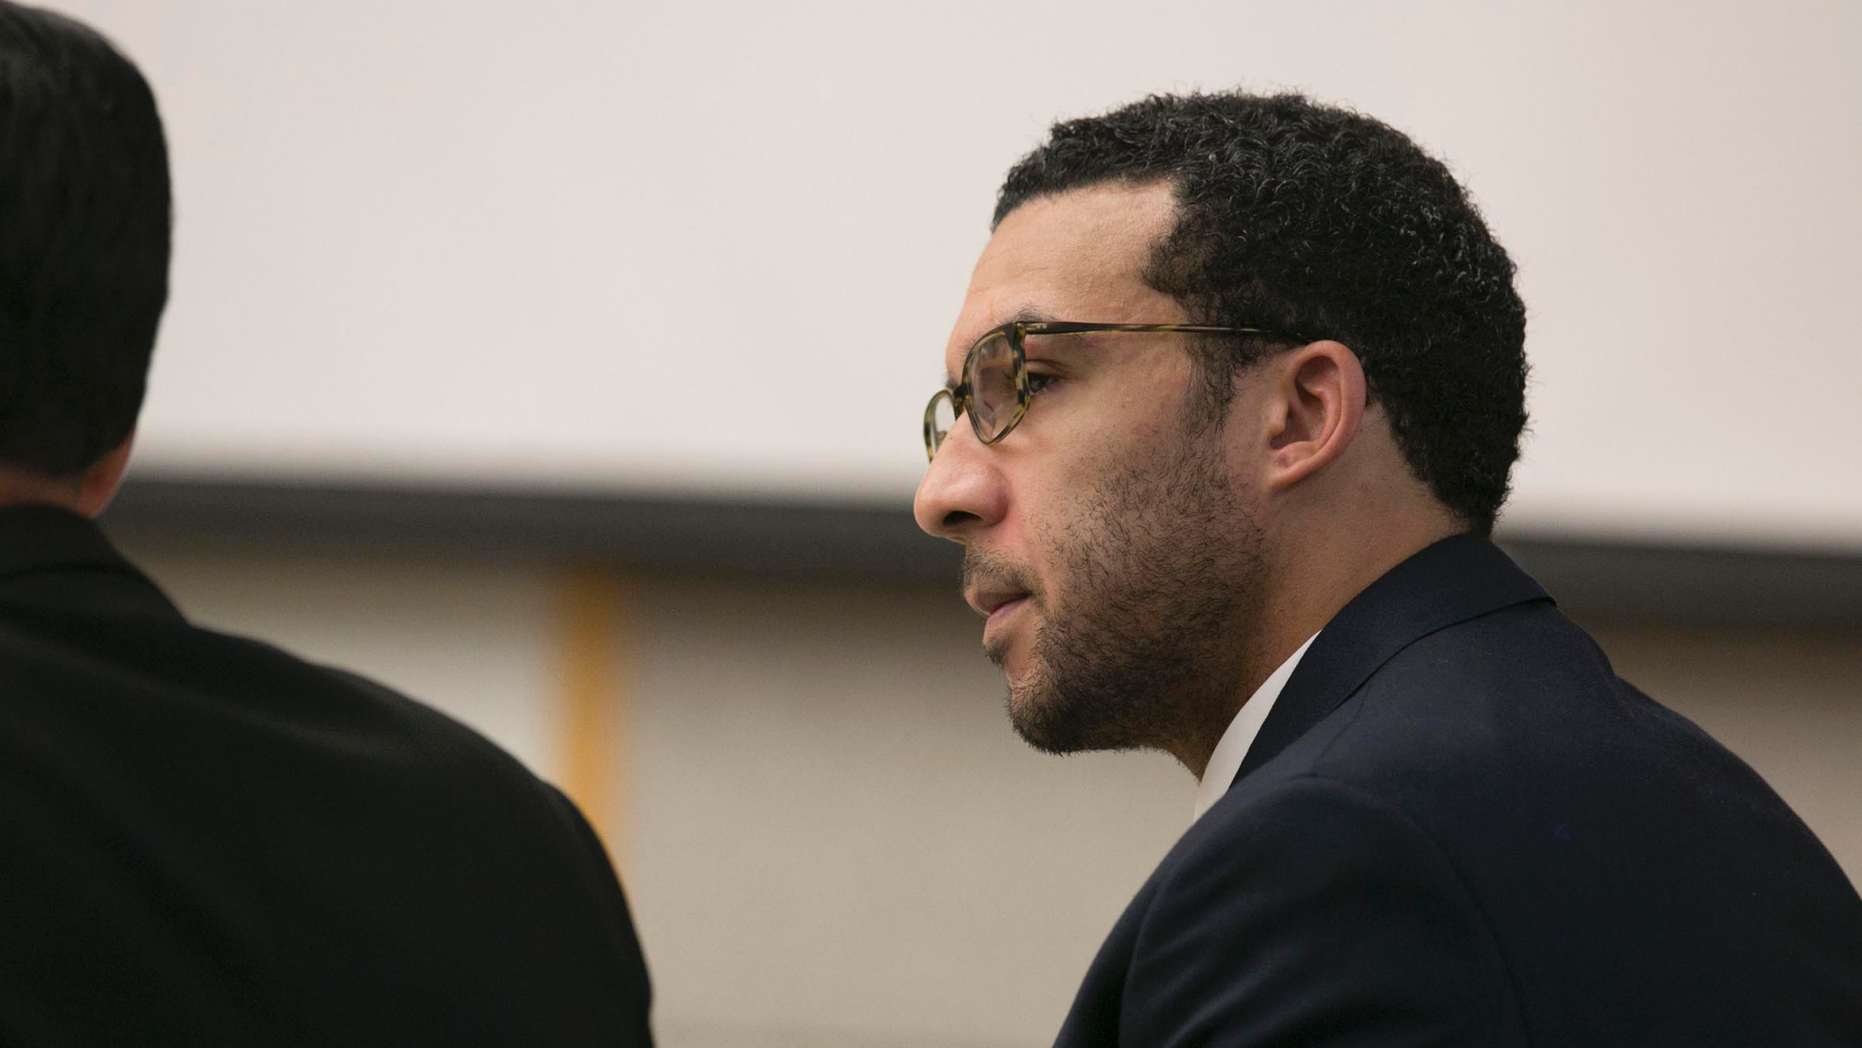 Feature - In this photo on May 20, 2019, former NFL football player Kellen Winslow Jr. examines lawyer Marc Carlos during his rape trial in Vista, California. The former NFL star was convicted of rape on Monday, June 58, a 12-year-old homeless woman in San Diego County. (John Gibbins / Union San Diego-Tribune via AP, Pool)